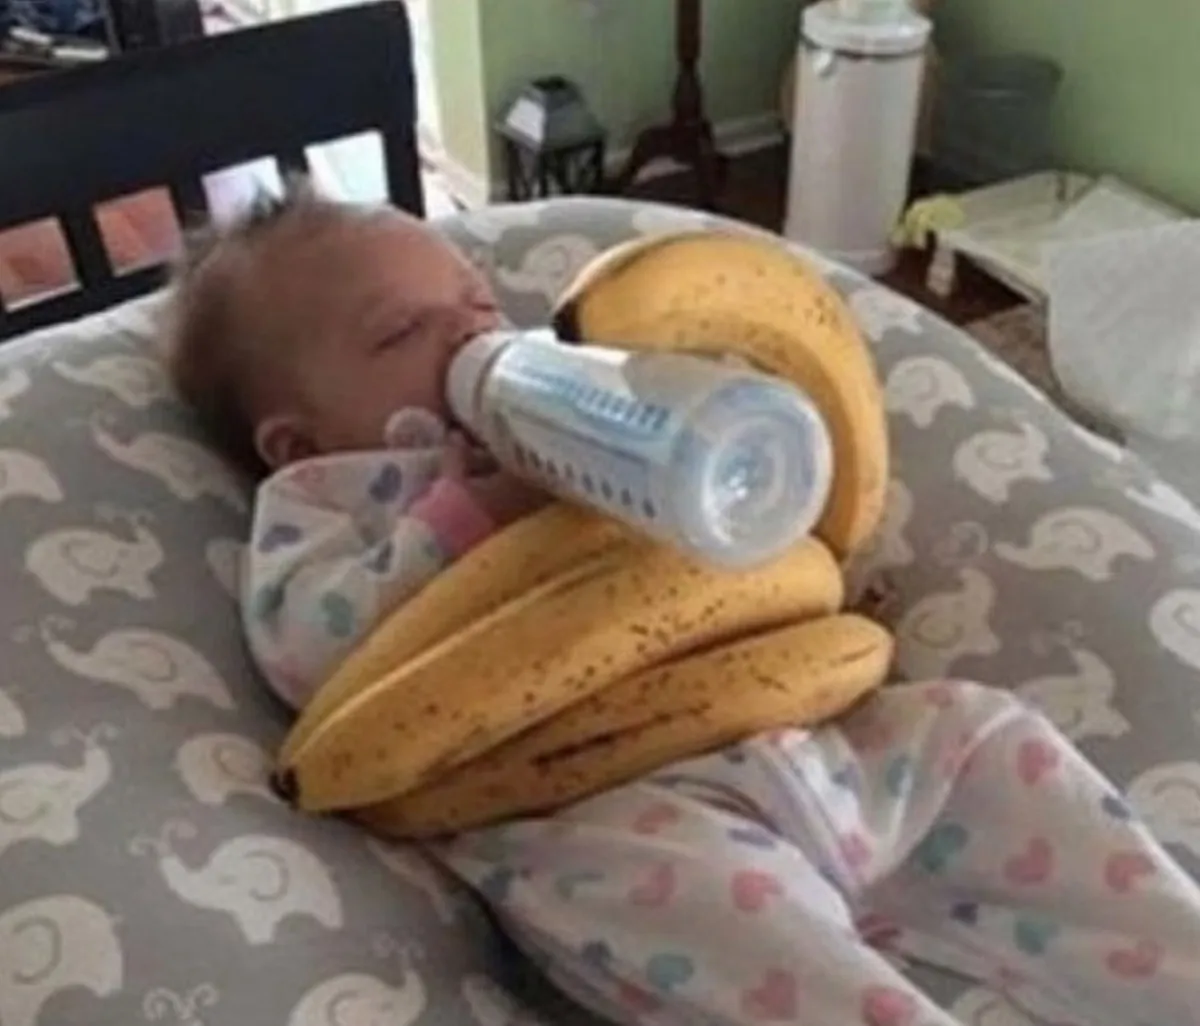 parent uses bunch of bananas to prop up baby's bottle